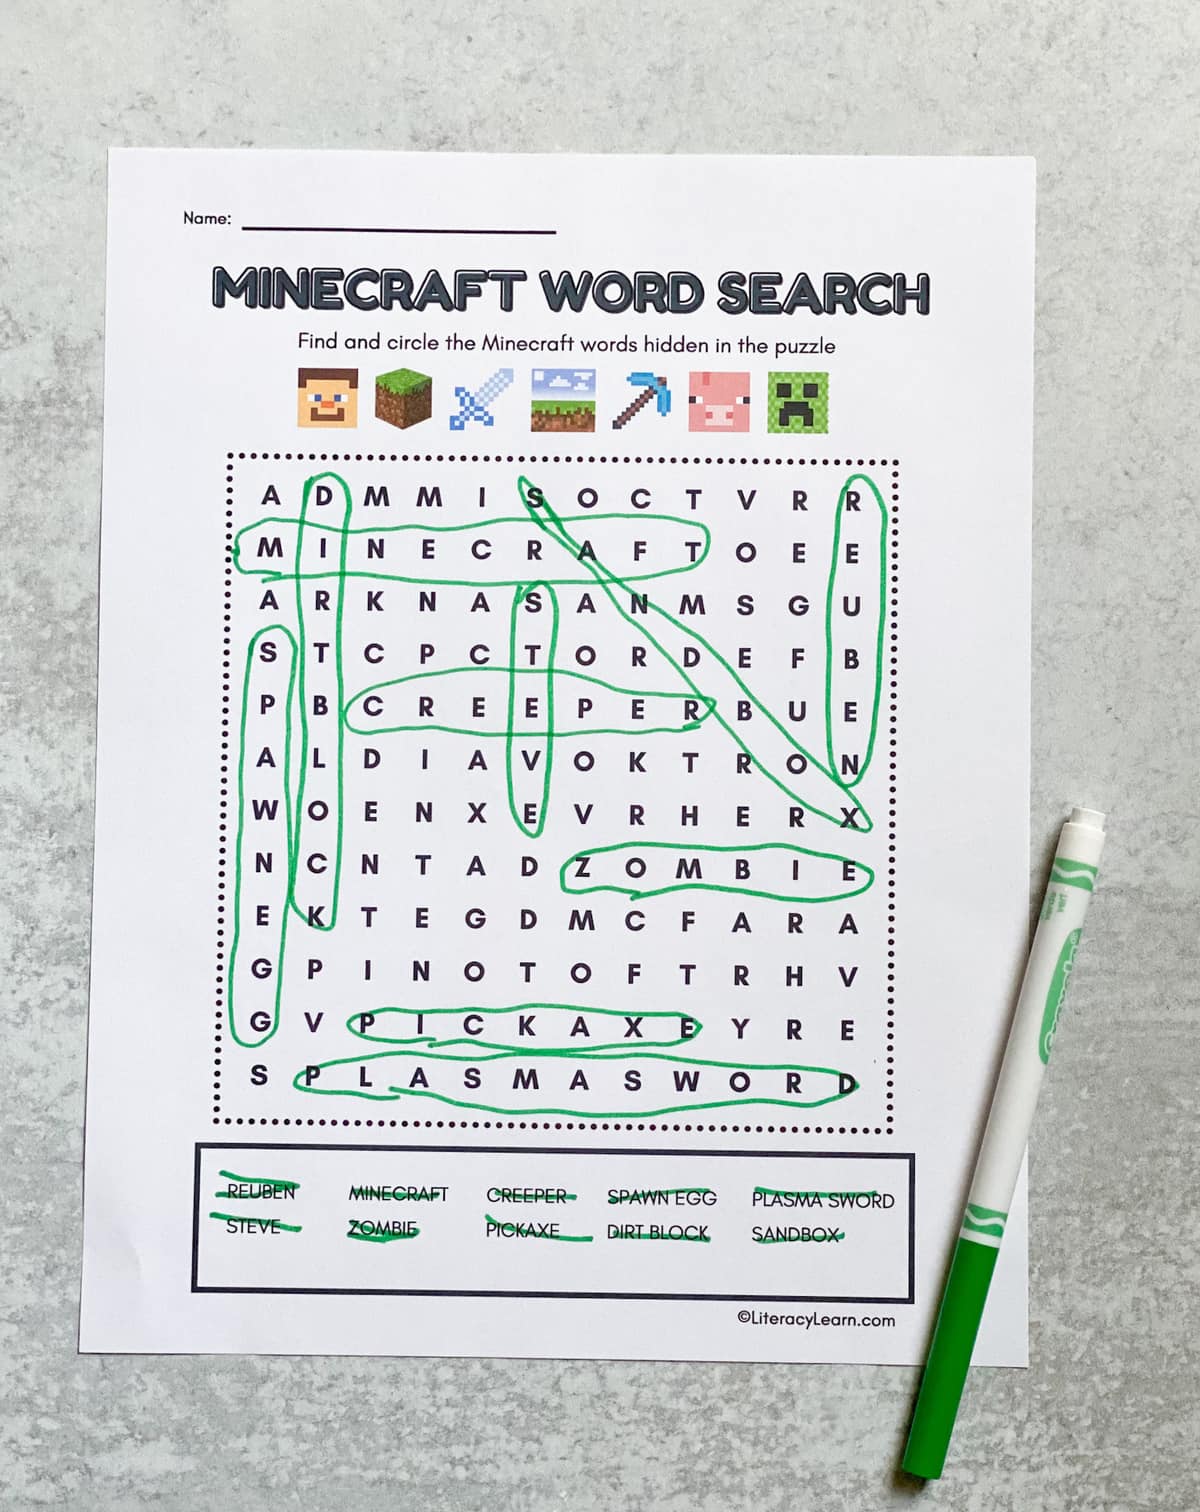 The printed and completed word search with a green marker.